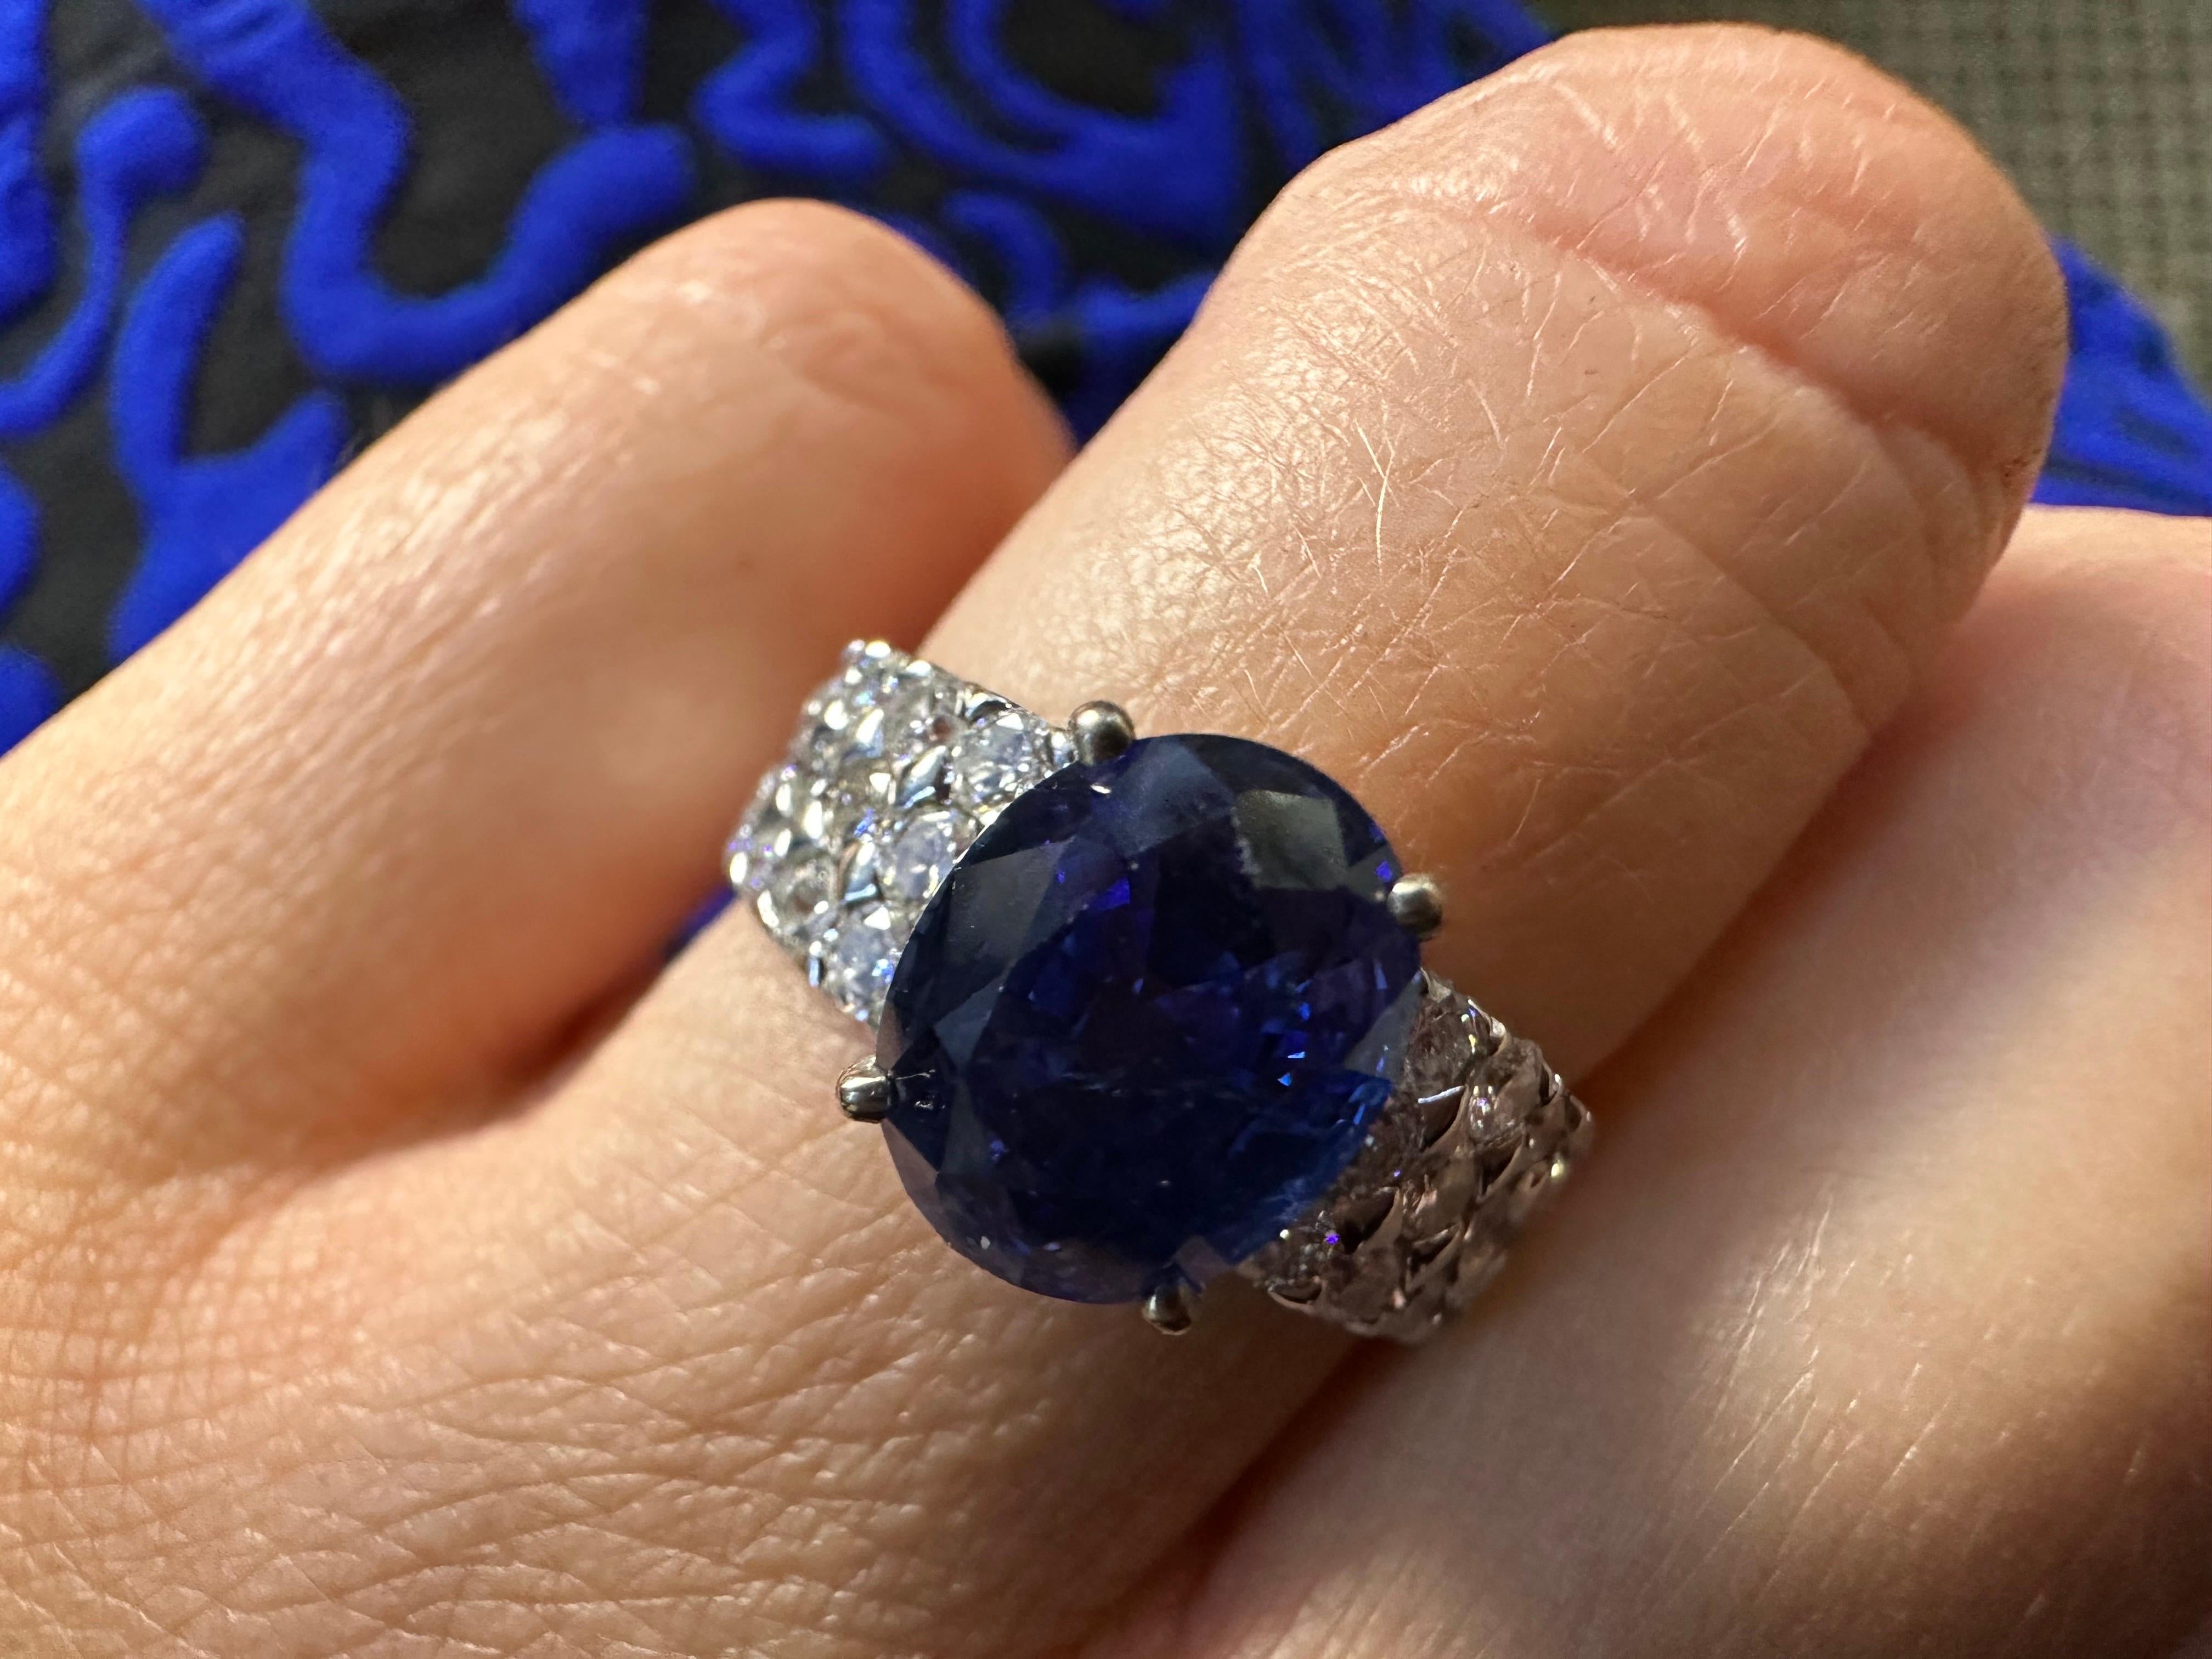 Oval sapphire diamond ring in 18KT white gold, ring is size 7. The sapphire is a rich deep blue color, sparkling and very bright!

Metal Type: 18KT
Natural Side Diamond(s):
Color: G
Cut:Round Brilliant
Carat: 0.70ct
Clarity: VS-SI

Natural Sapphire: